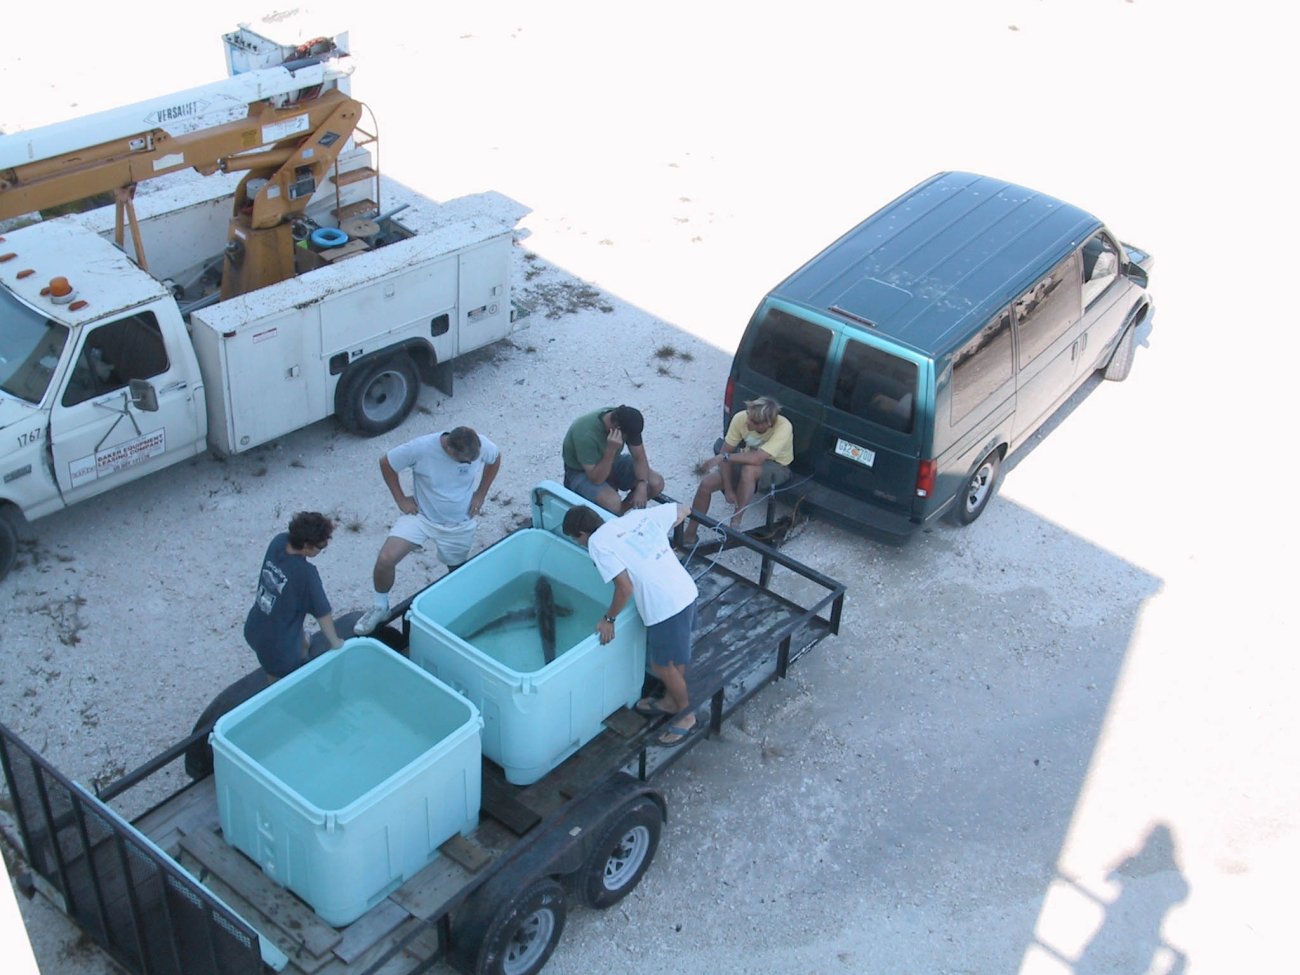 Laboratory staff viewing broodstock prior to stocking in research facilityat the Florida Keys